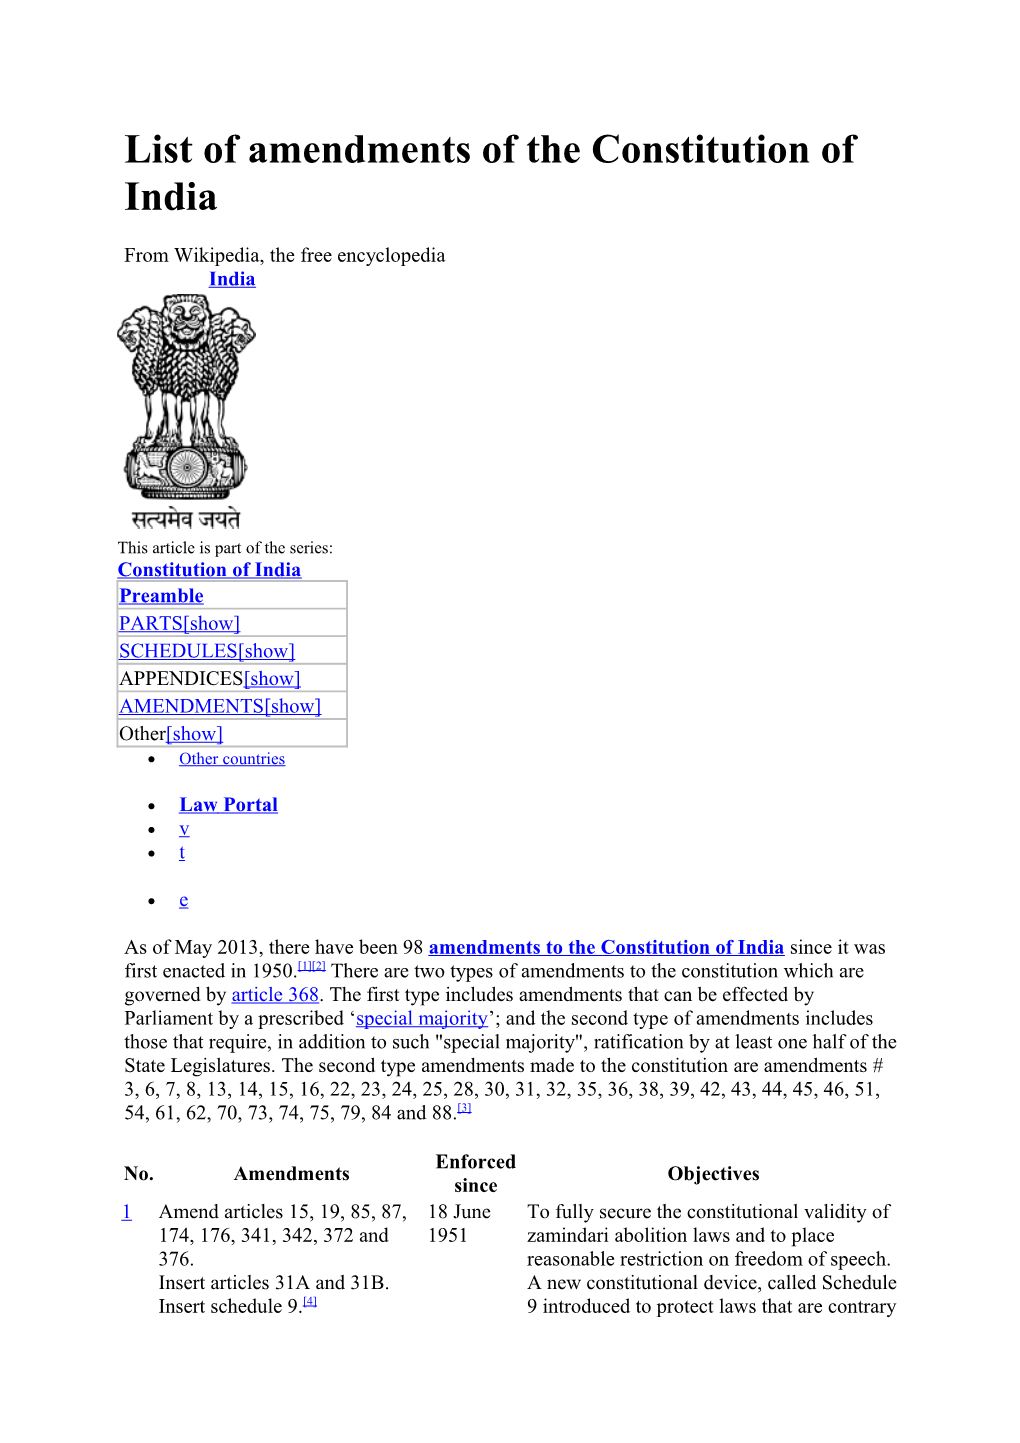 List of Amendments of the Constitution of India